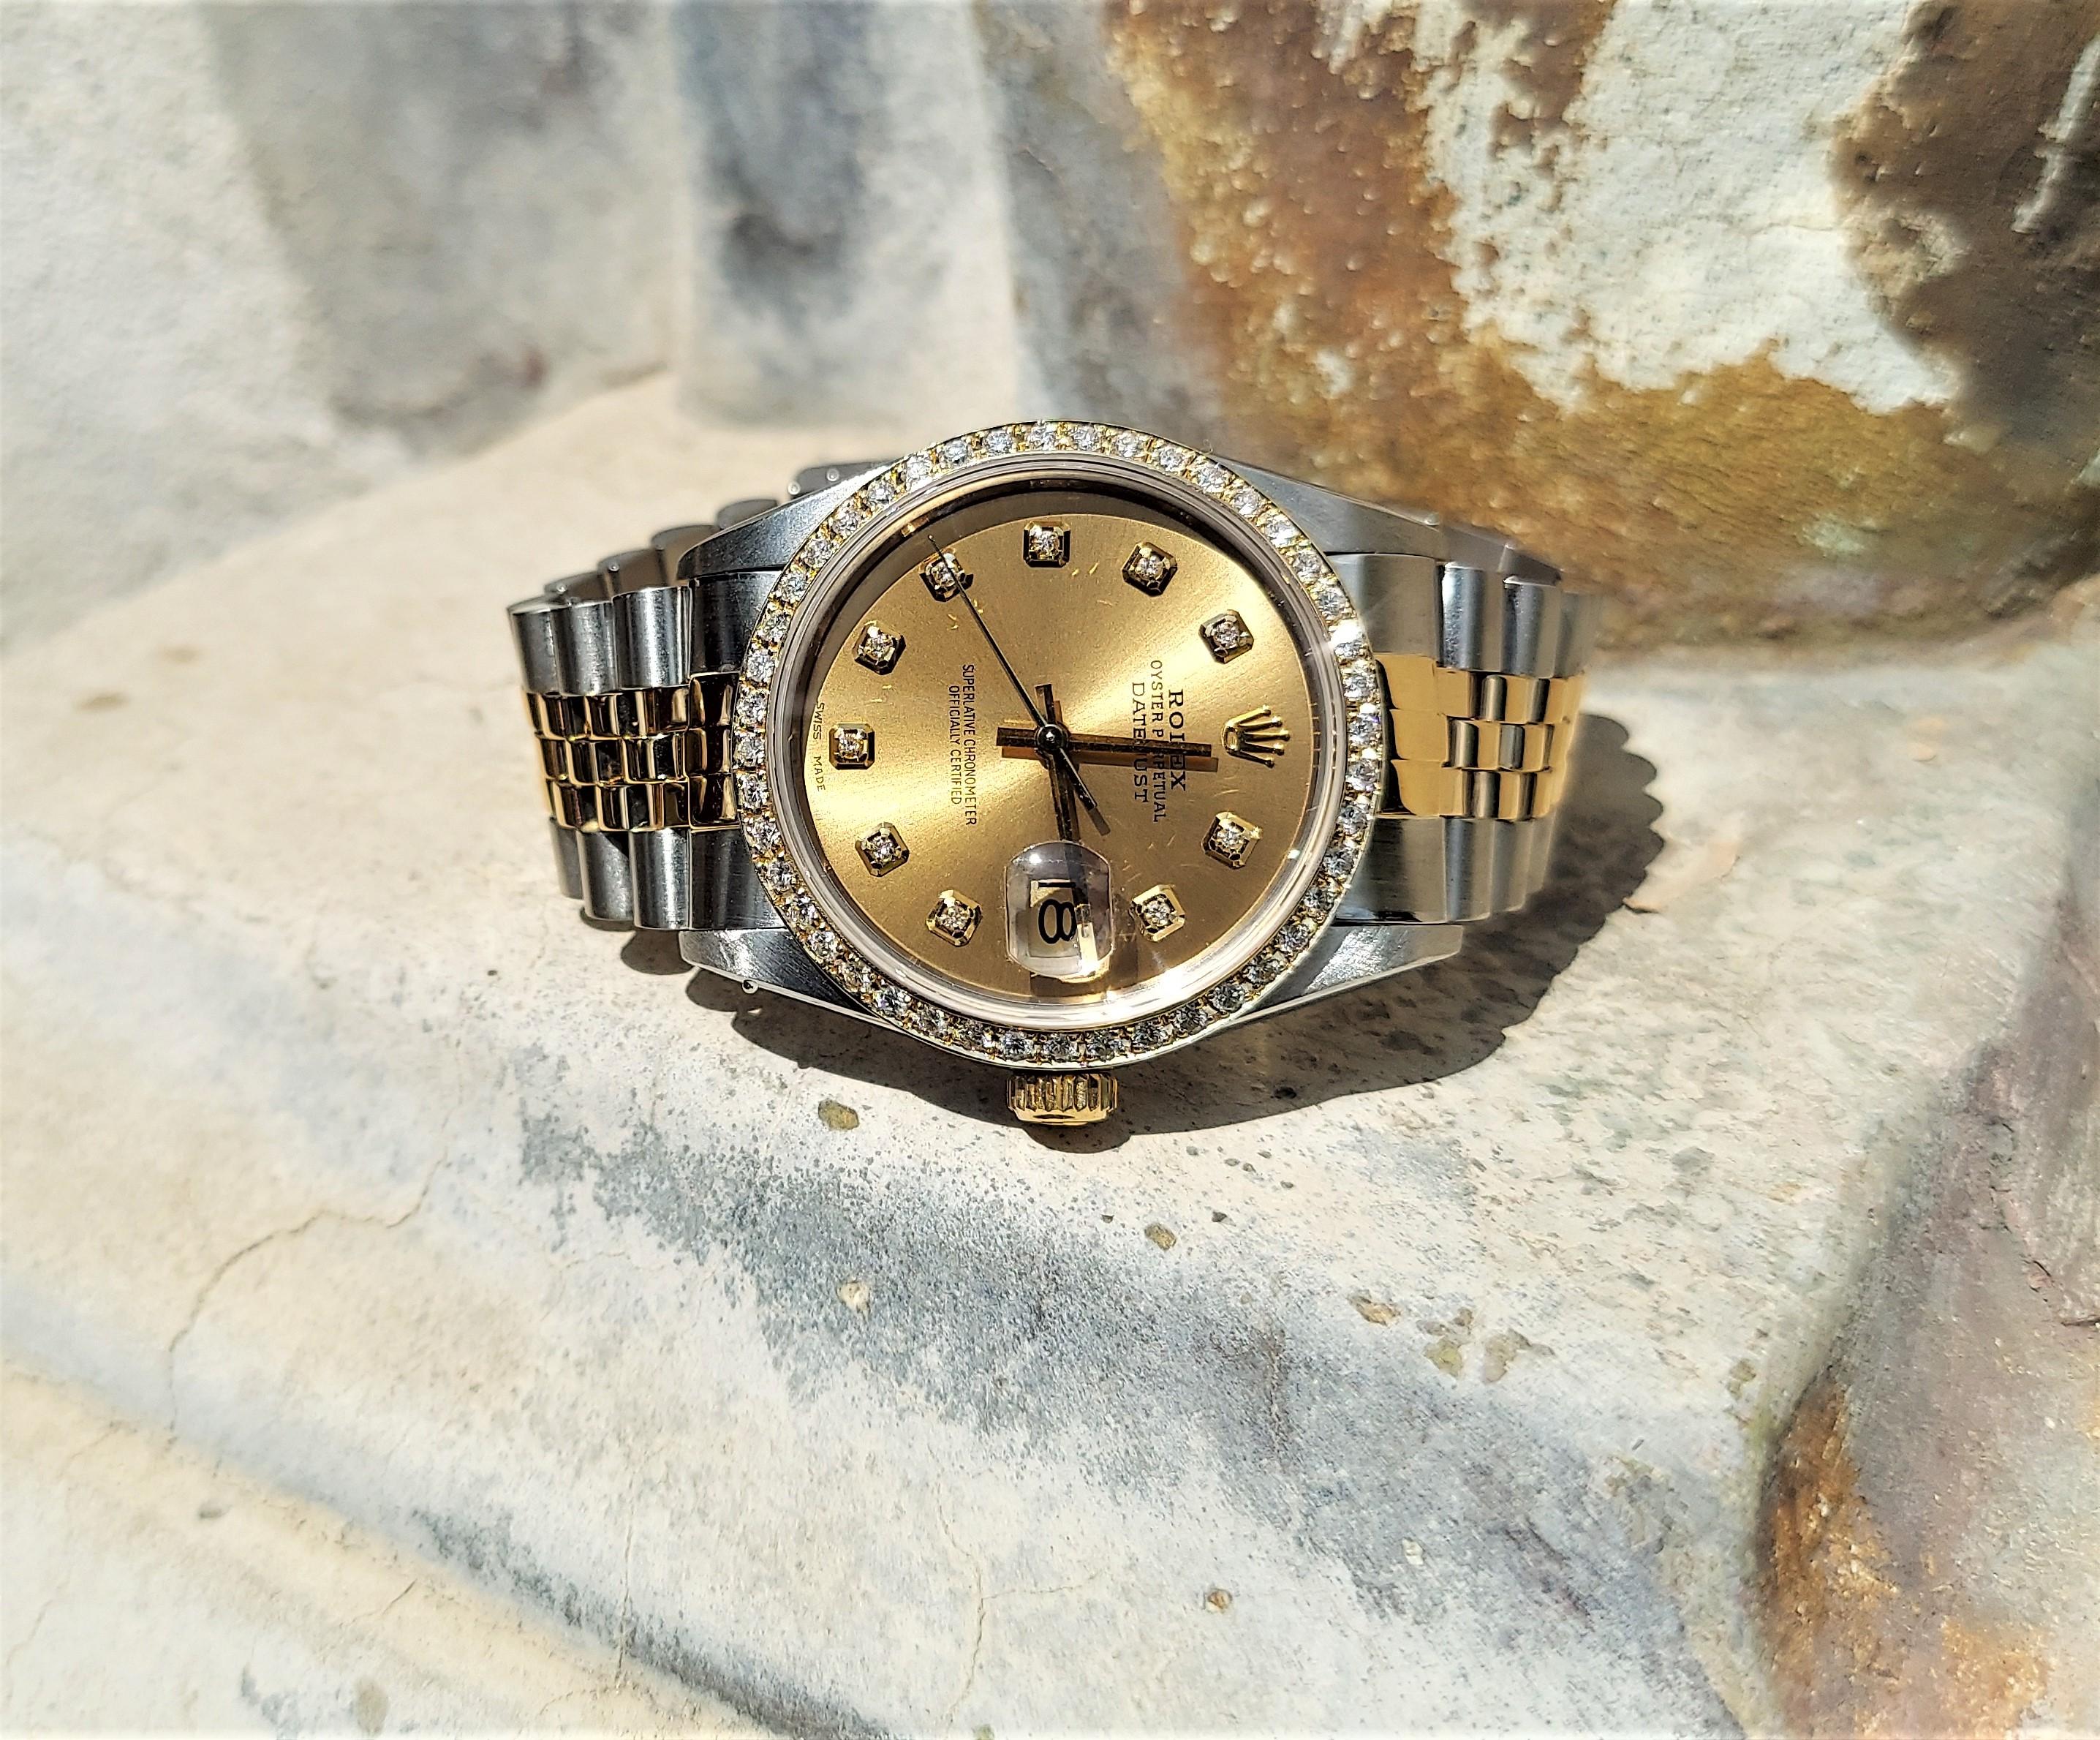 (Watch Description)
Brand - Rolex
Model - 16233 Datejust
Metals - Yellow Gold / Steel
Case Size - 36mm
Dial - Champagne Diamond
Crystal - Sapphire
Movement - Automatic CAL,3135
Wrist Size - Two tone Jubilee
Wrist Size - 7 1/2 Inches

3 Year In House